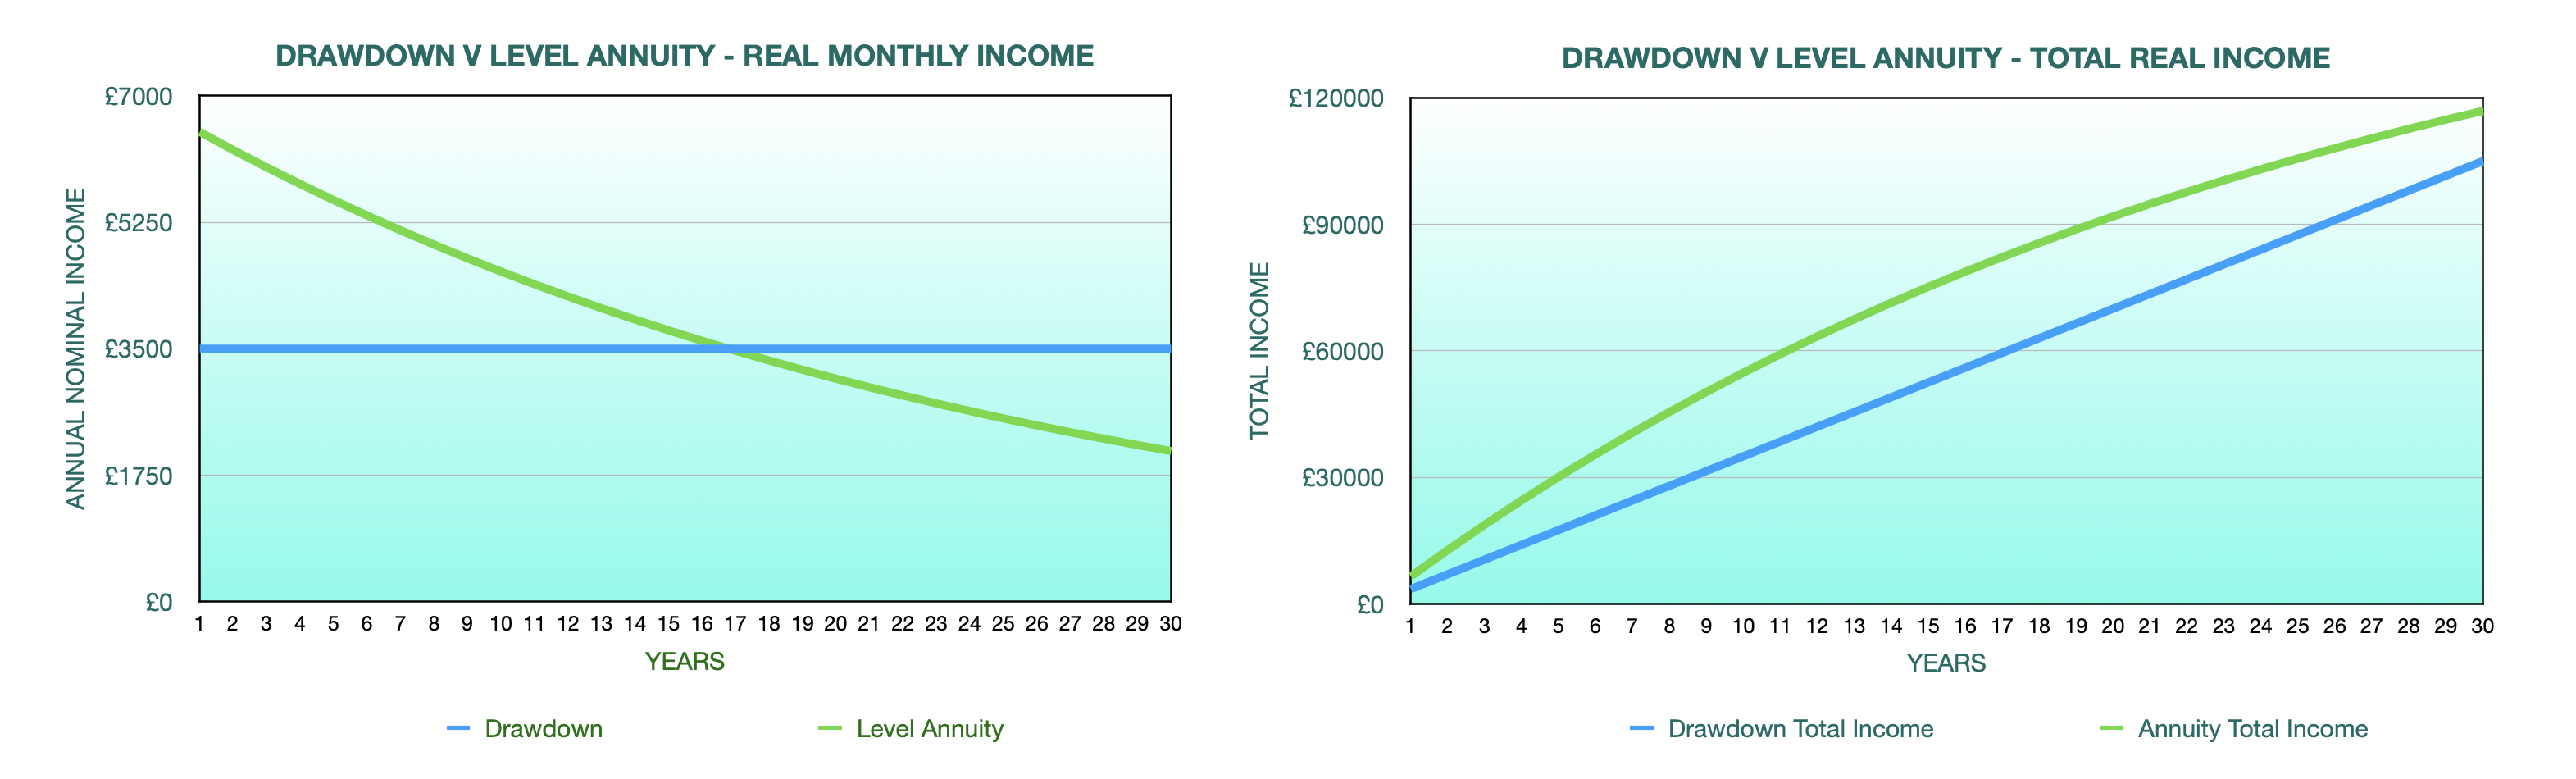 GRAPHS COMPARING DRAWDOWN WITH A LEVEL ANNUITY